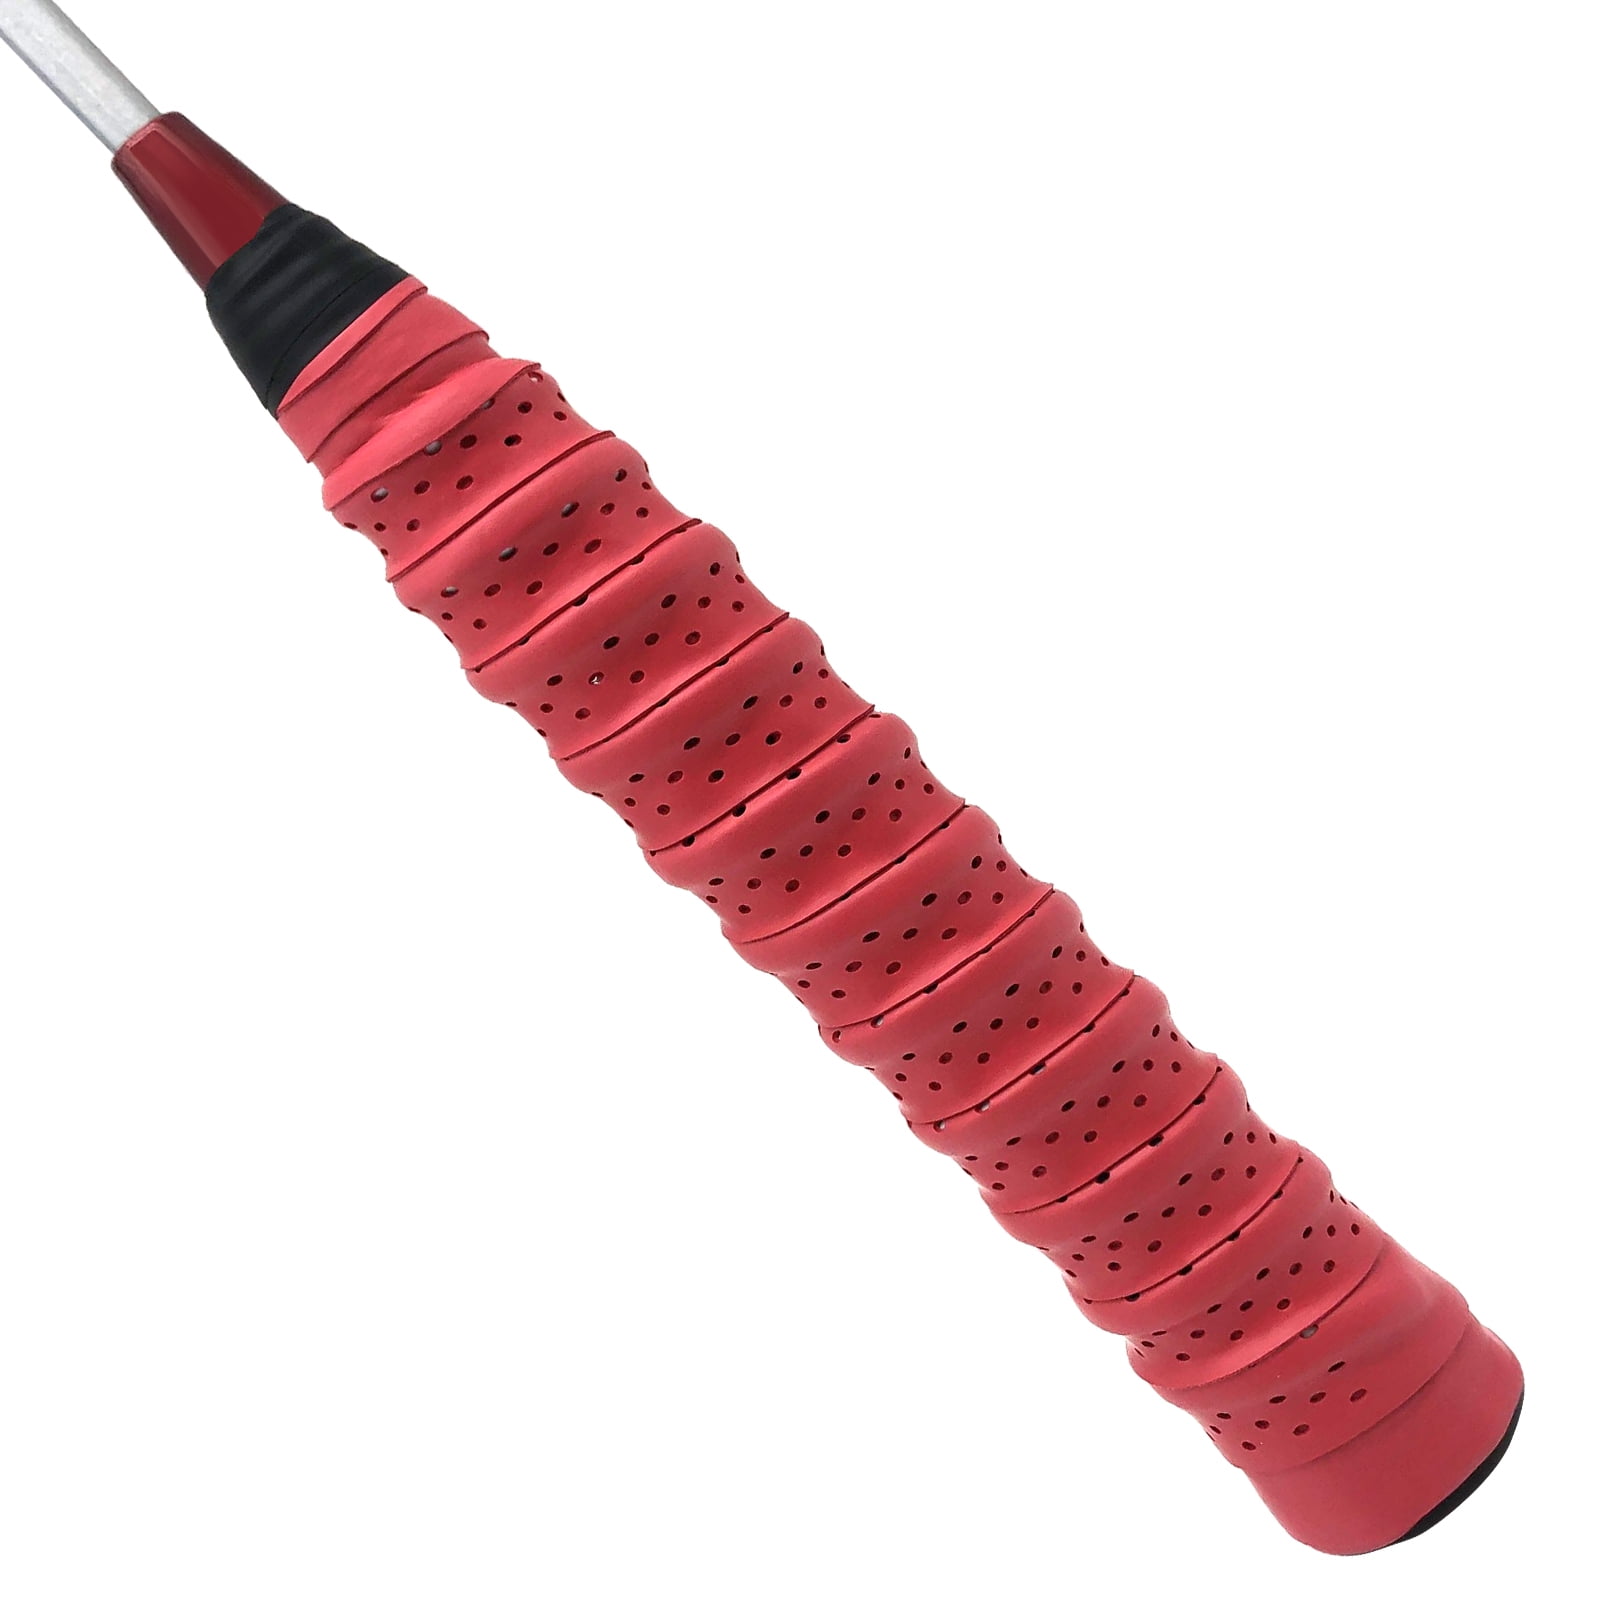 1pc Non-slip Badminton Racket Grip Tape Overgrip With Anti-stick Damping &  Sweat-absorption Function, Suitable For Tennis Racket